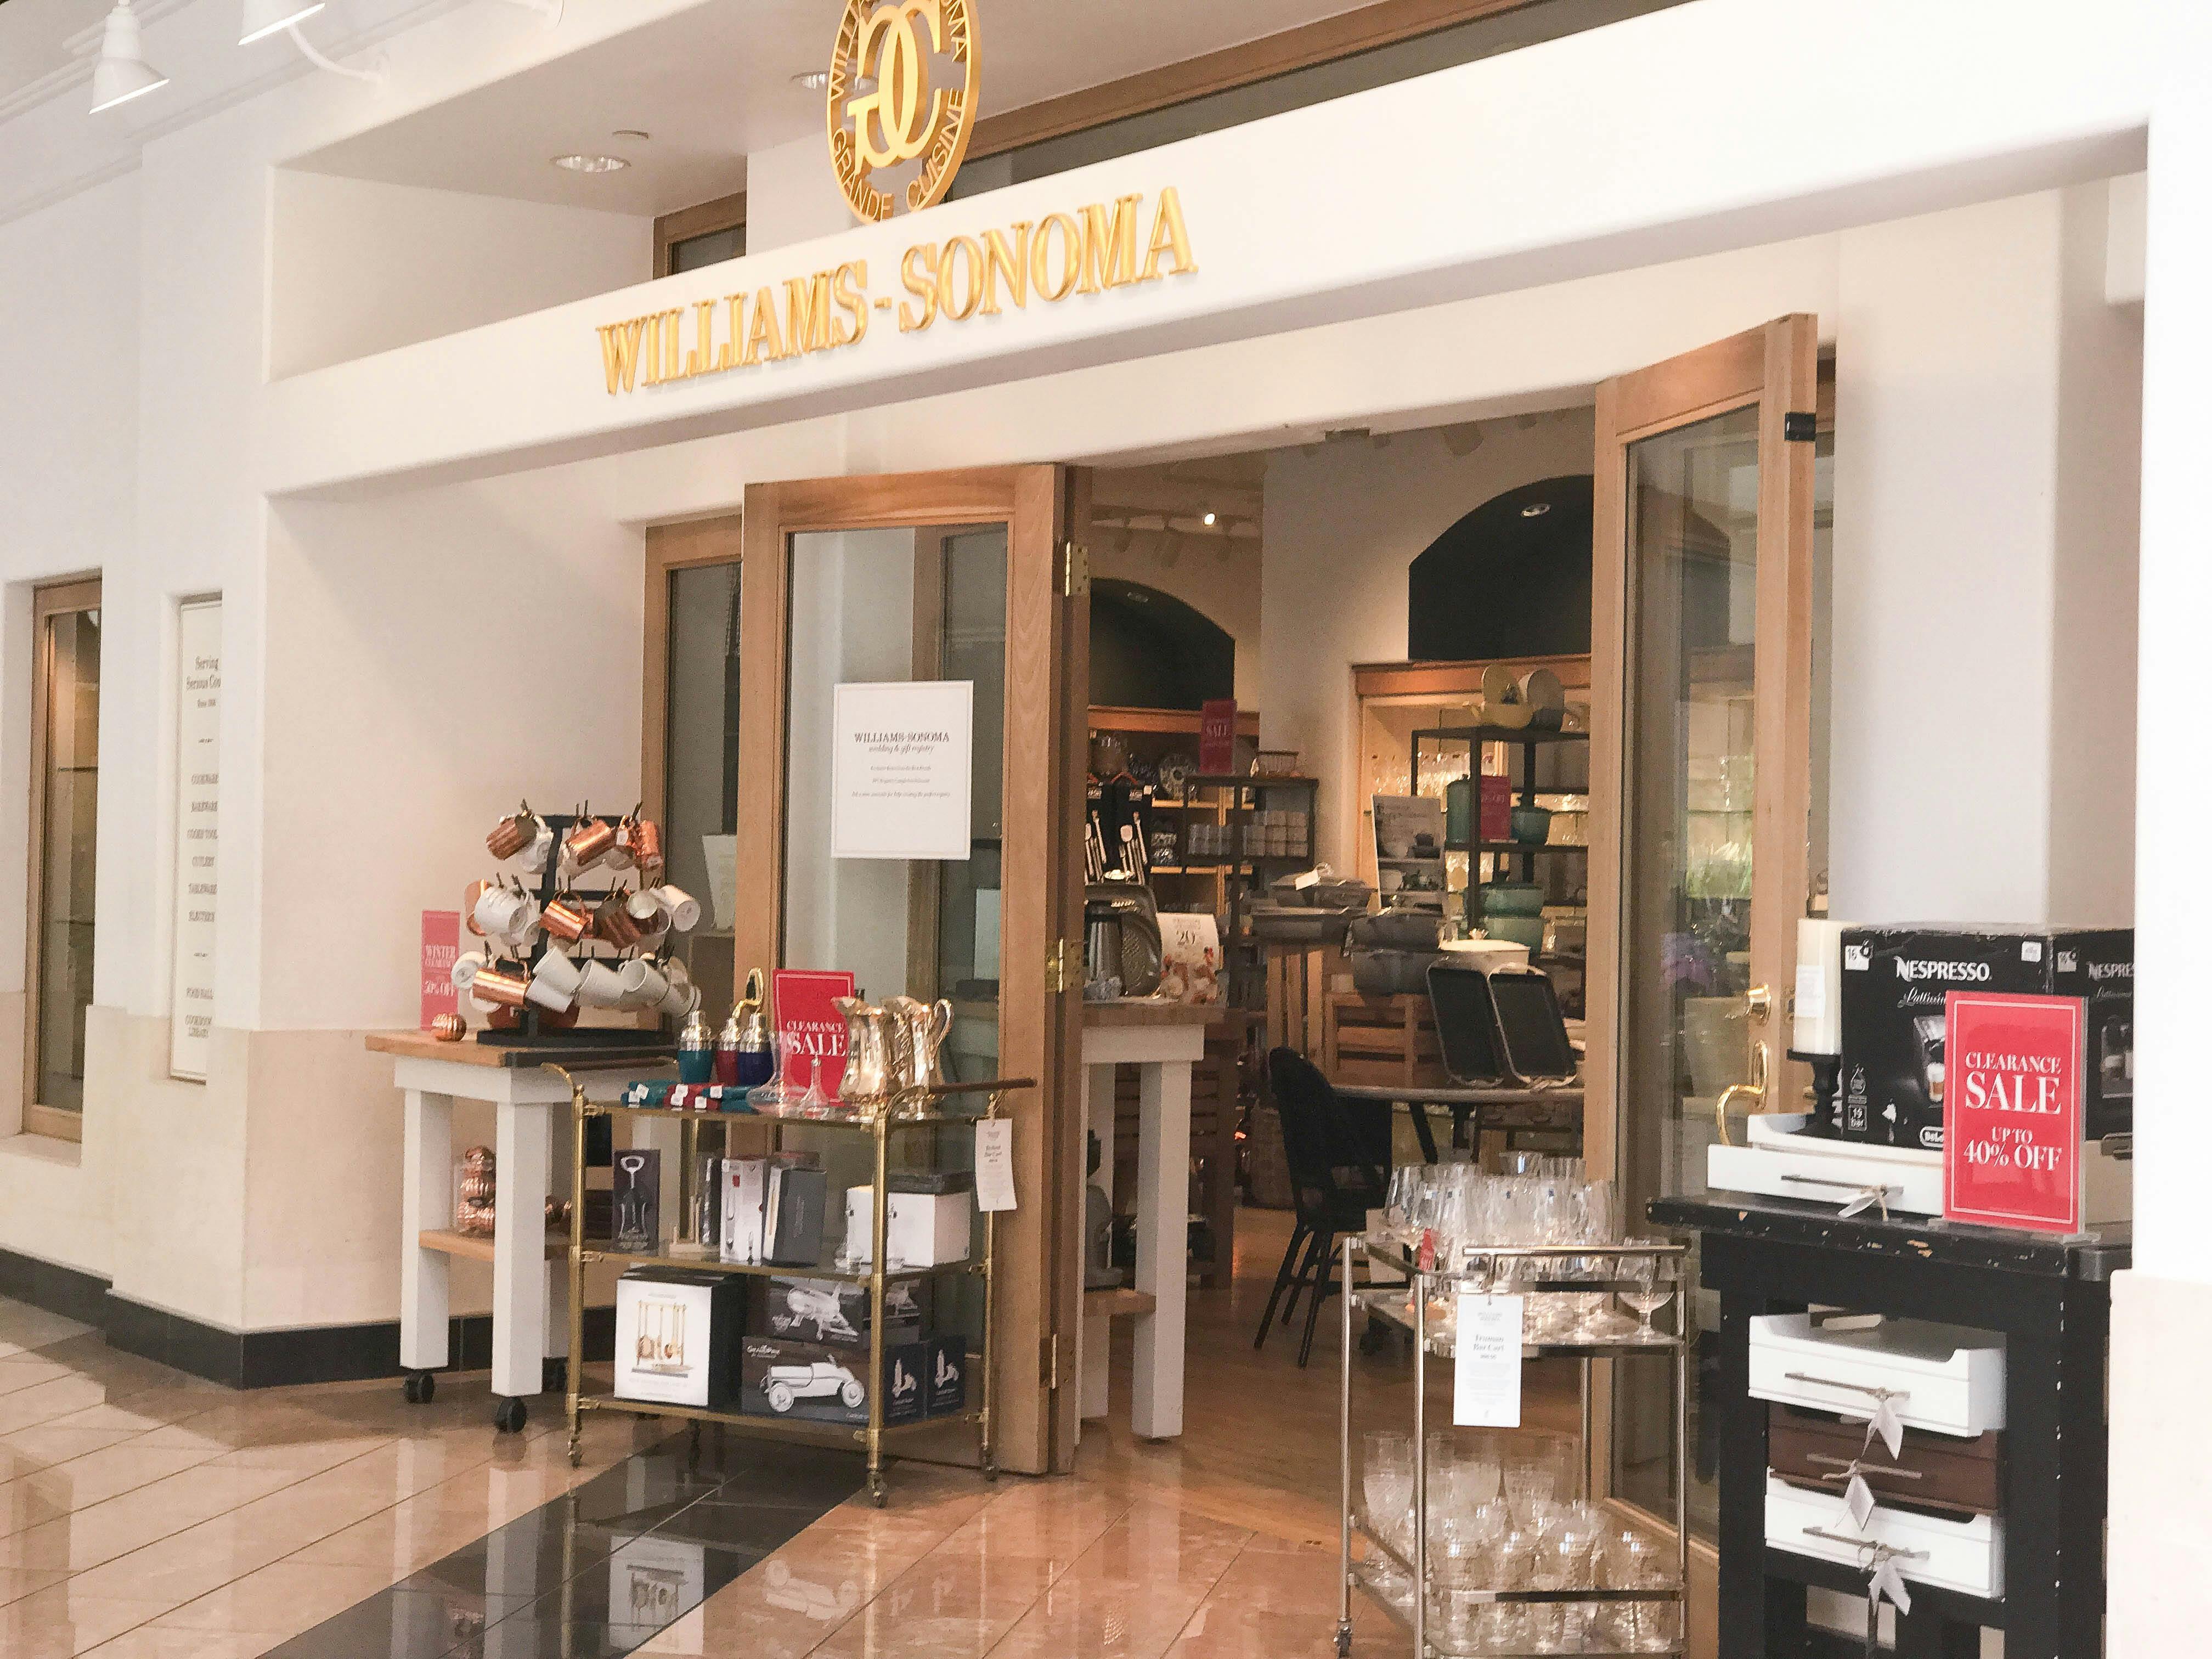 23 Secret Tips to Help You Afford Williams-Sonoma - The Krazy Coupon Lady